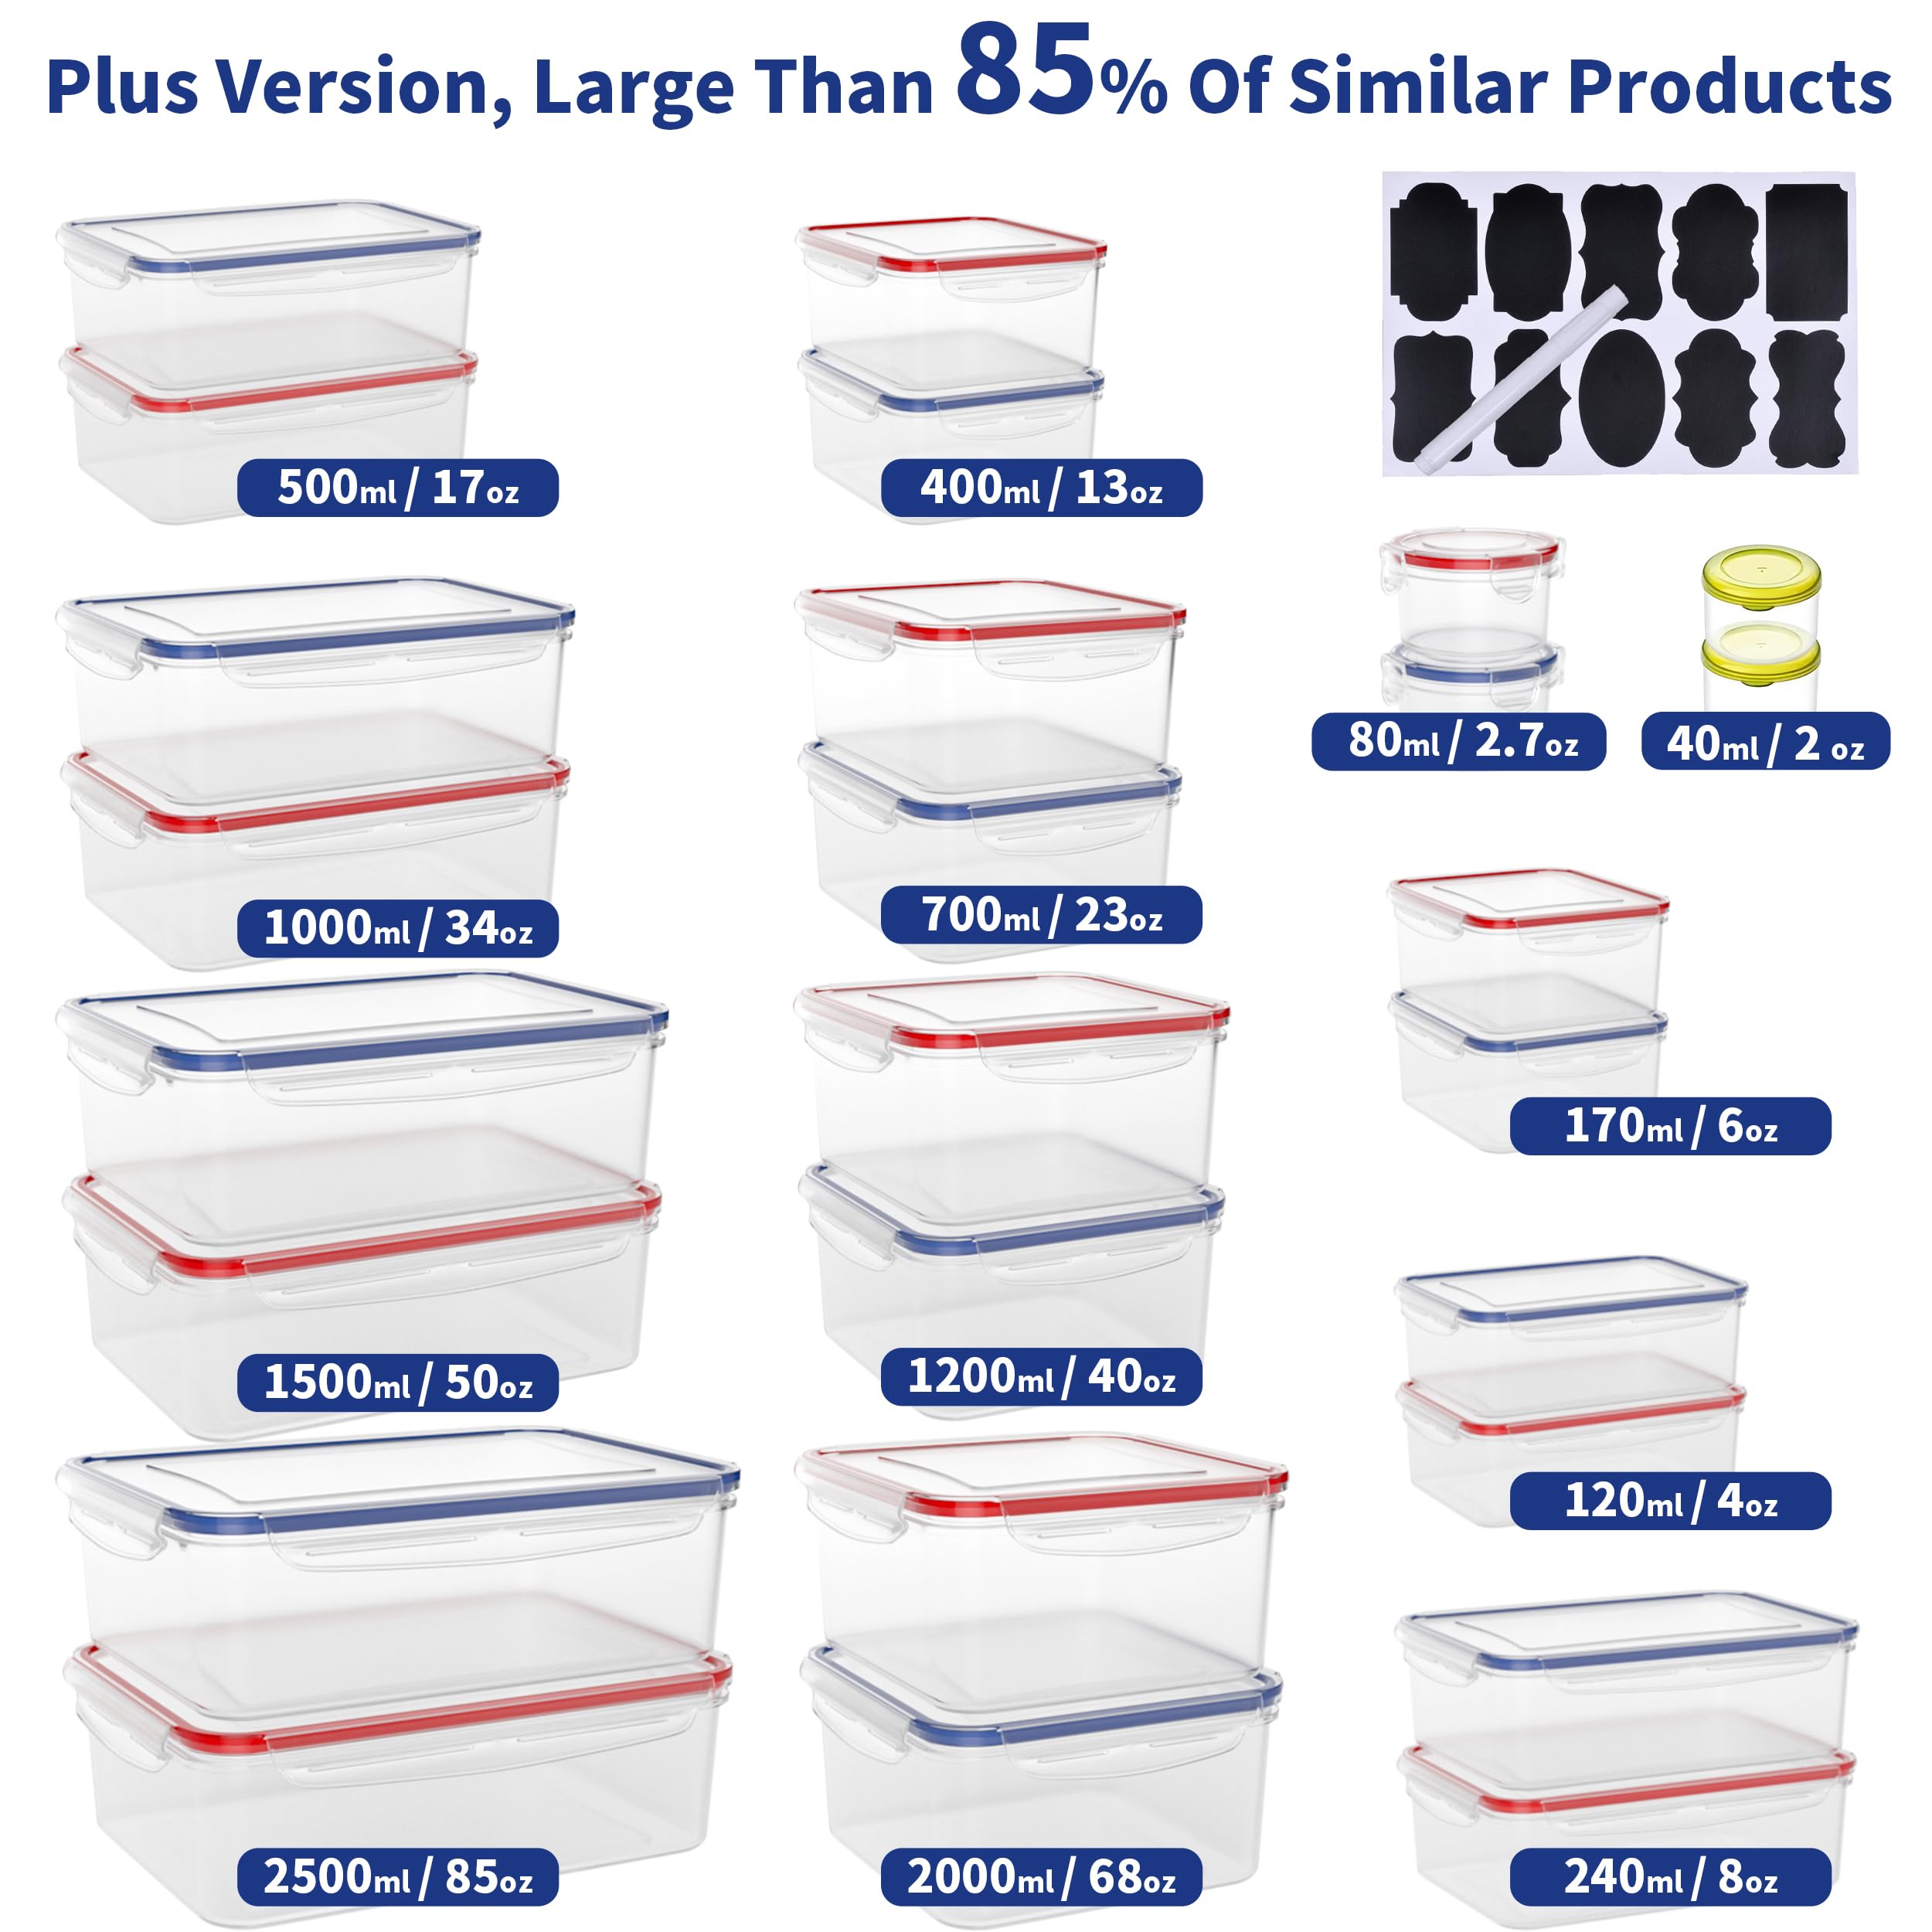 52-Piece Large Food Storage Containers with Lids Airtight, Health Material 85oz Leakproof Reusable Plastic Storage Containers, for Lunch, Meal Prep, and Leftovers, Kitchen Organizer, Freezer Container